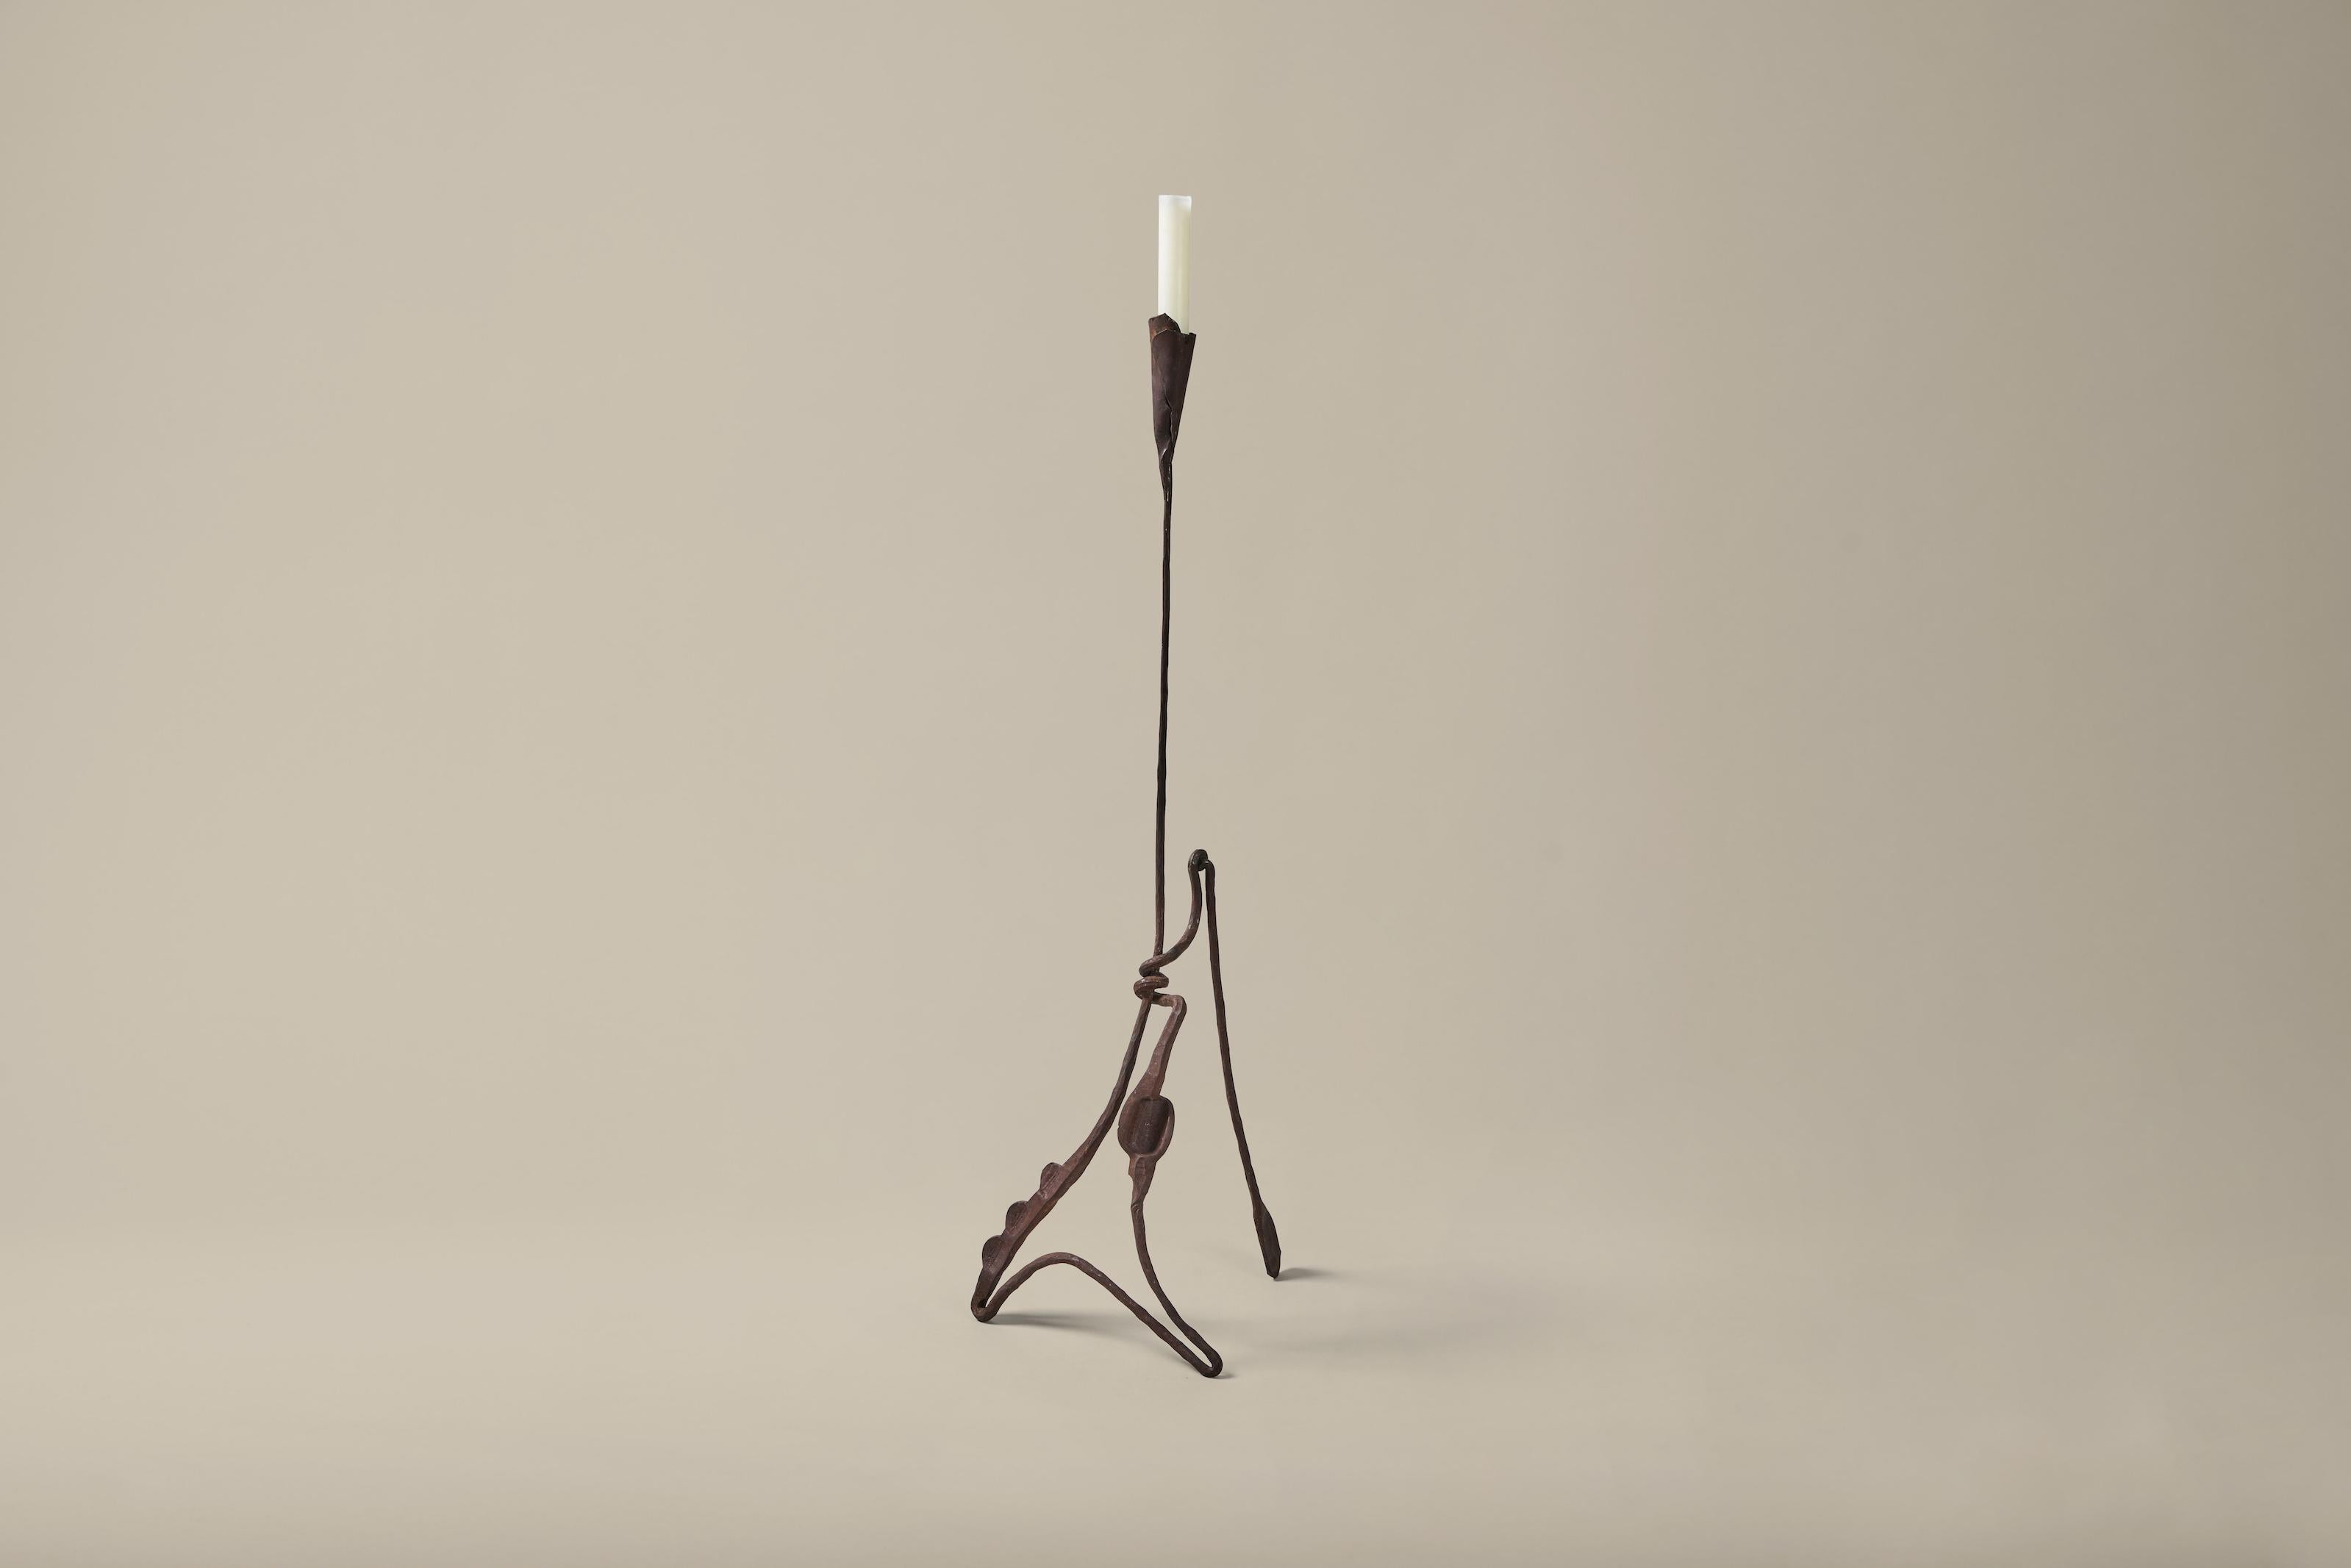 This sculptural iron candelabra holds a single candle. The raw, roughly hewn texture is characteristic of Brutalist design. Slightly higher than four feet tall, the piece is a statement-making accent for any space.

Measures 17